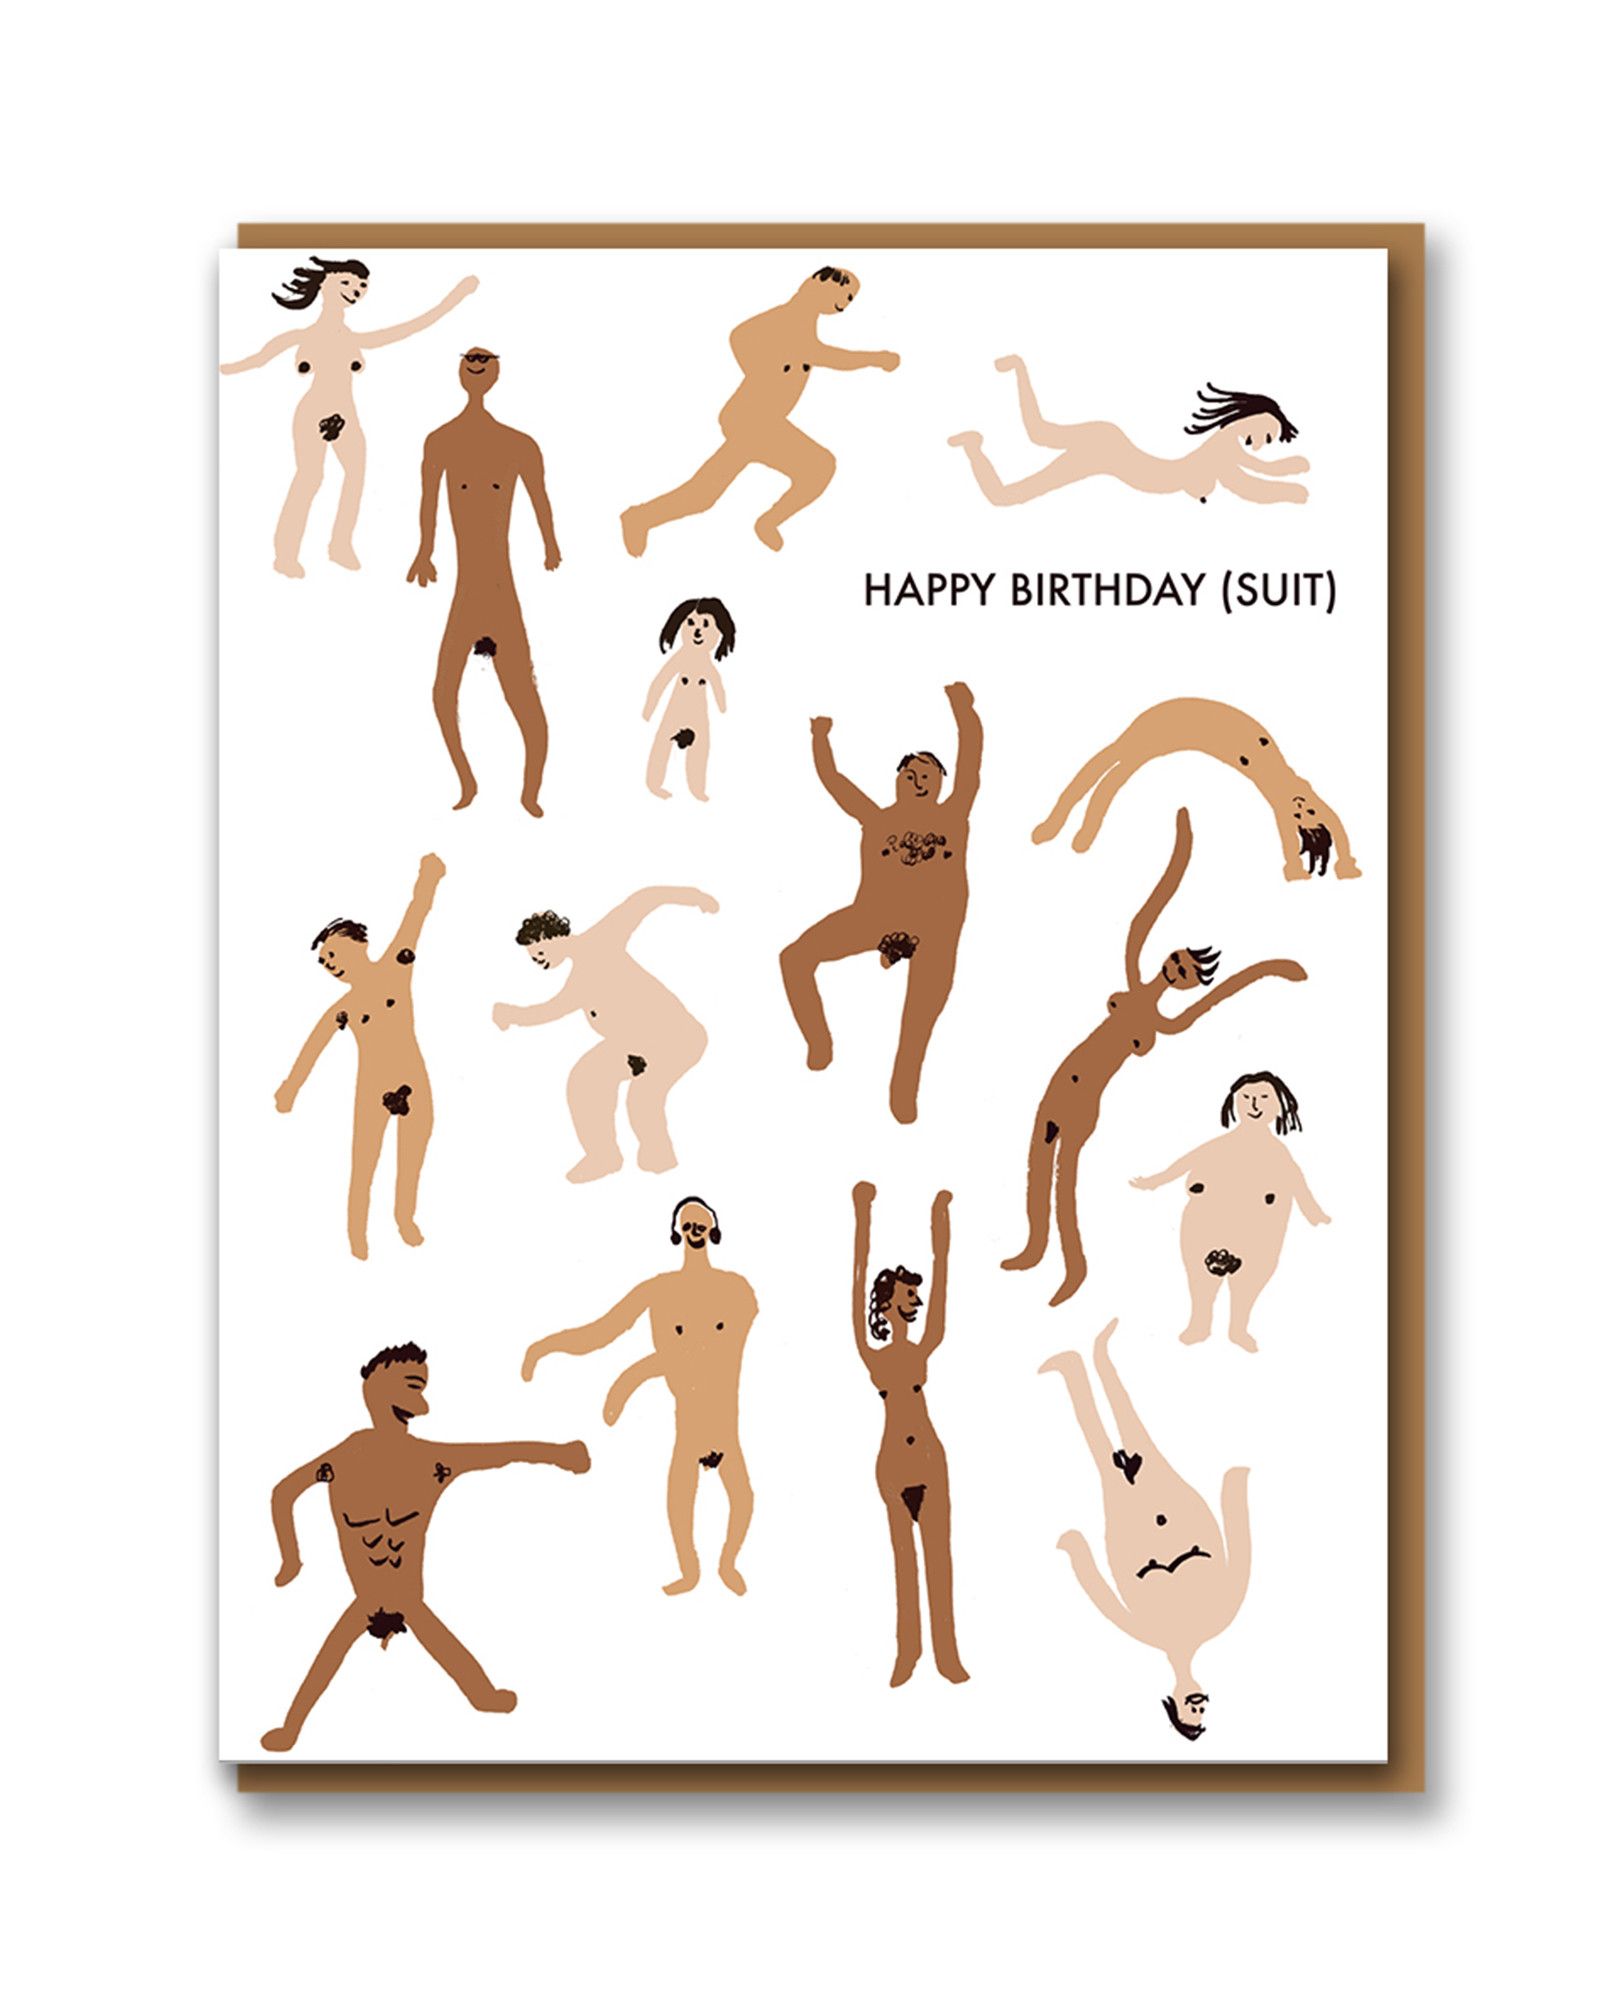 Birthday suit meaning